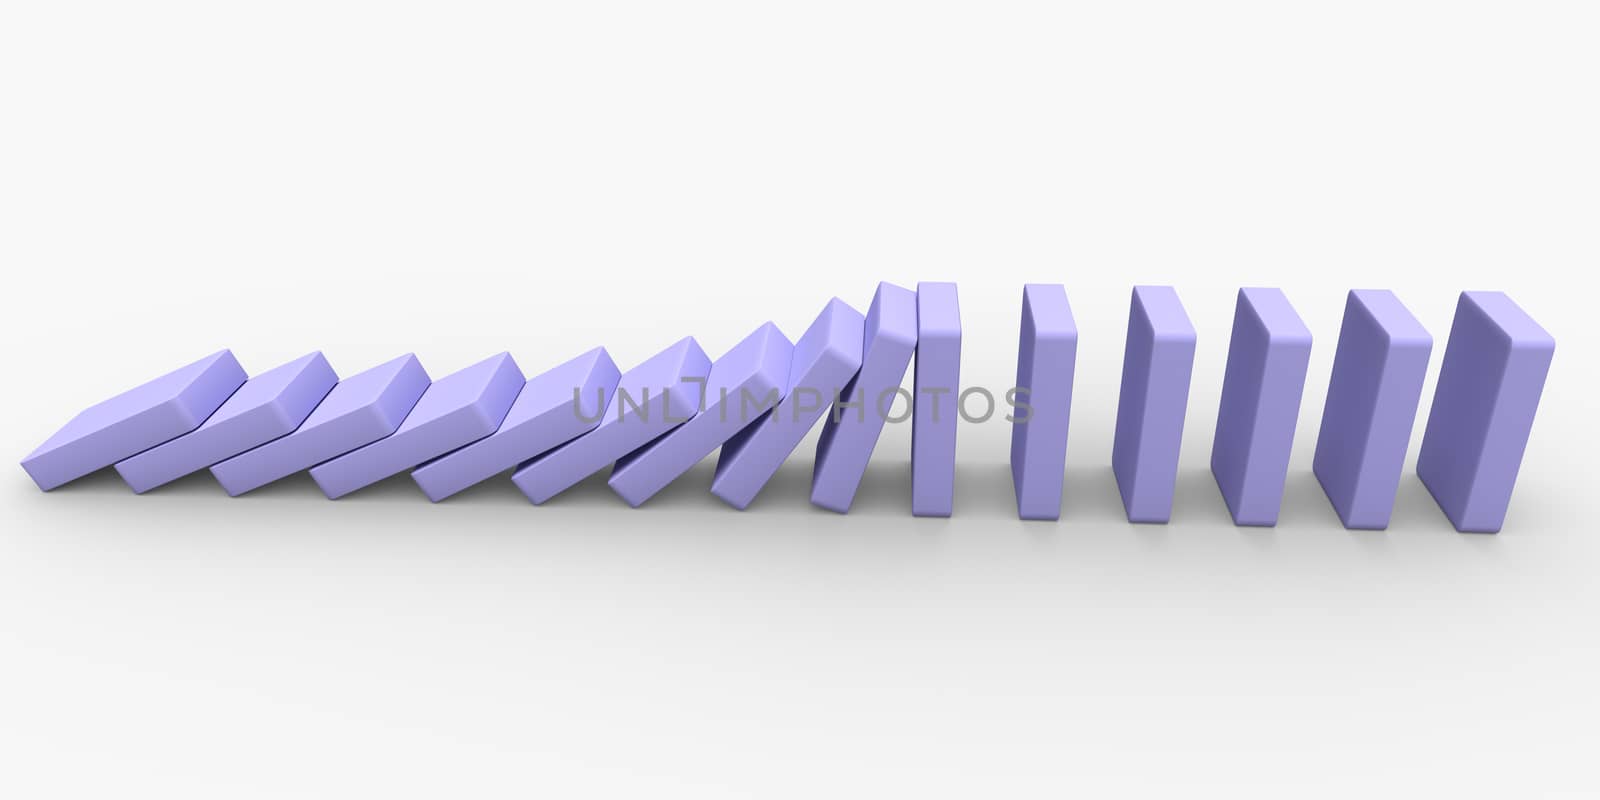 Domino. Conceptual illustration of falling bricks which push each other